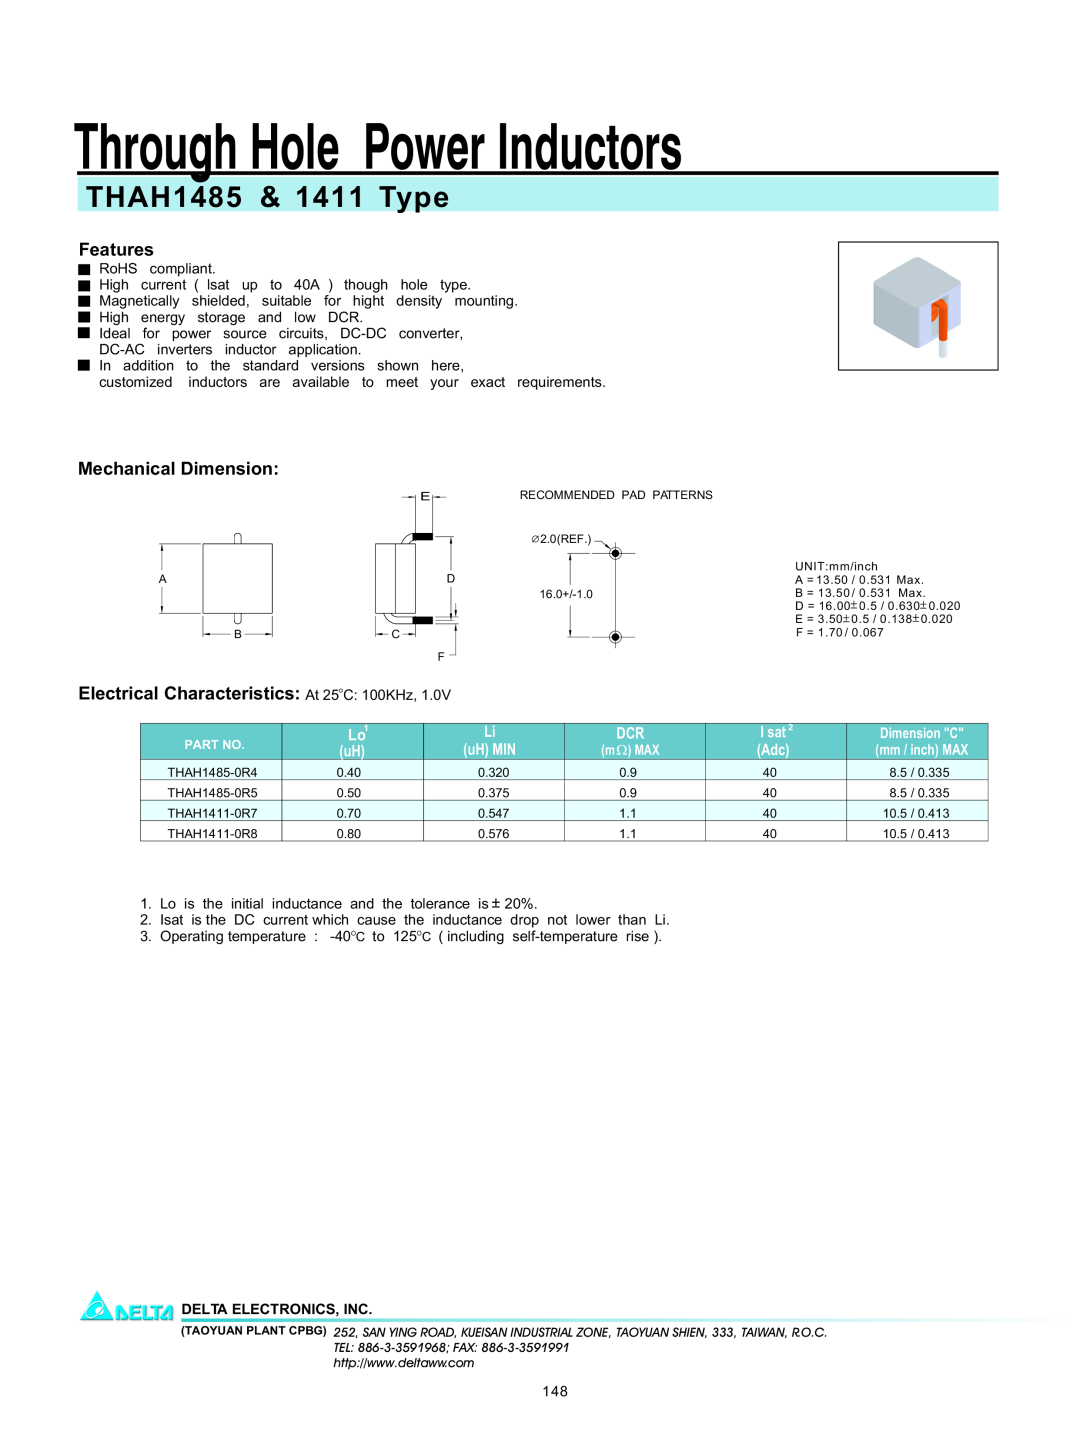 Delta Electronics manual Through Hole Power Inductors, THAH1485 & 1411 Type, Features, Mechanical Dimension, I sat 